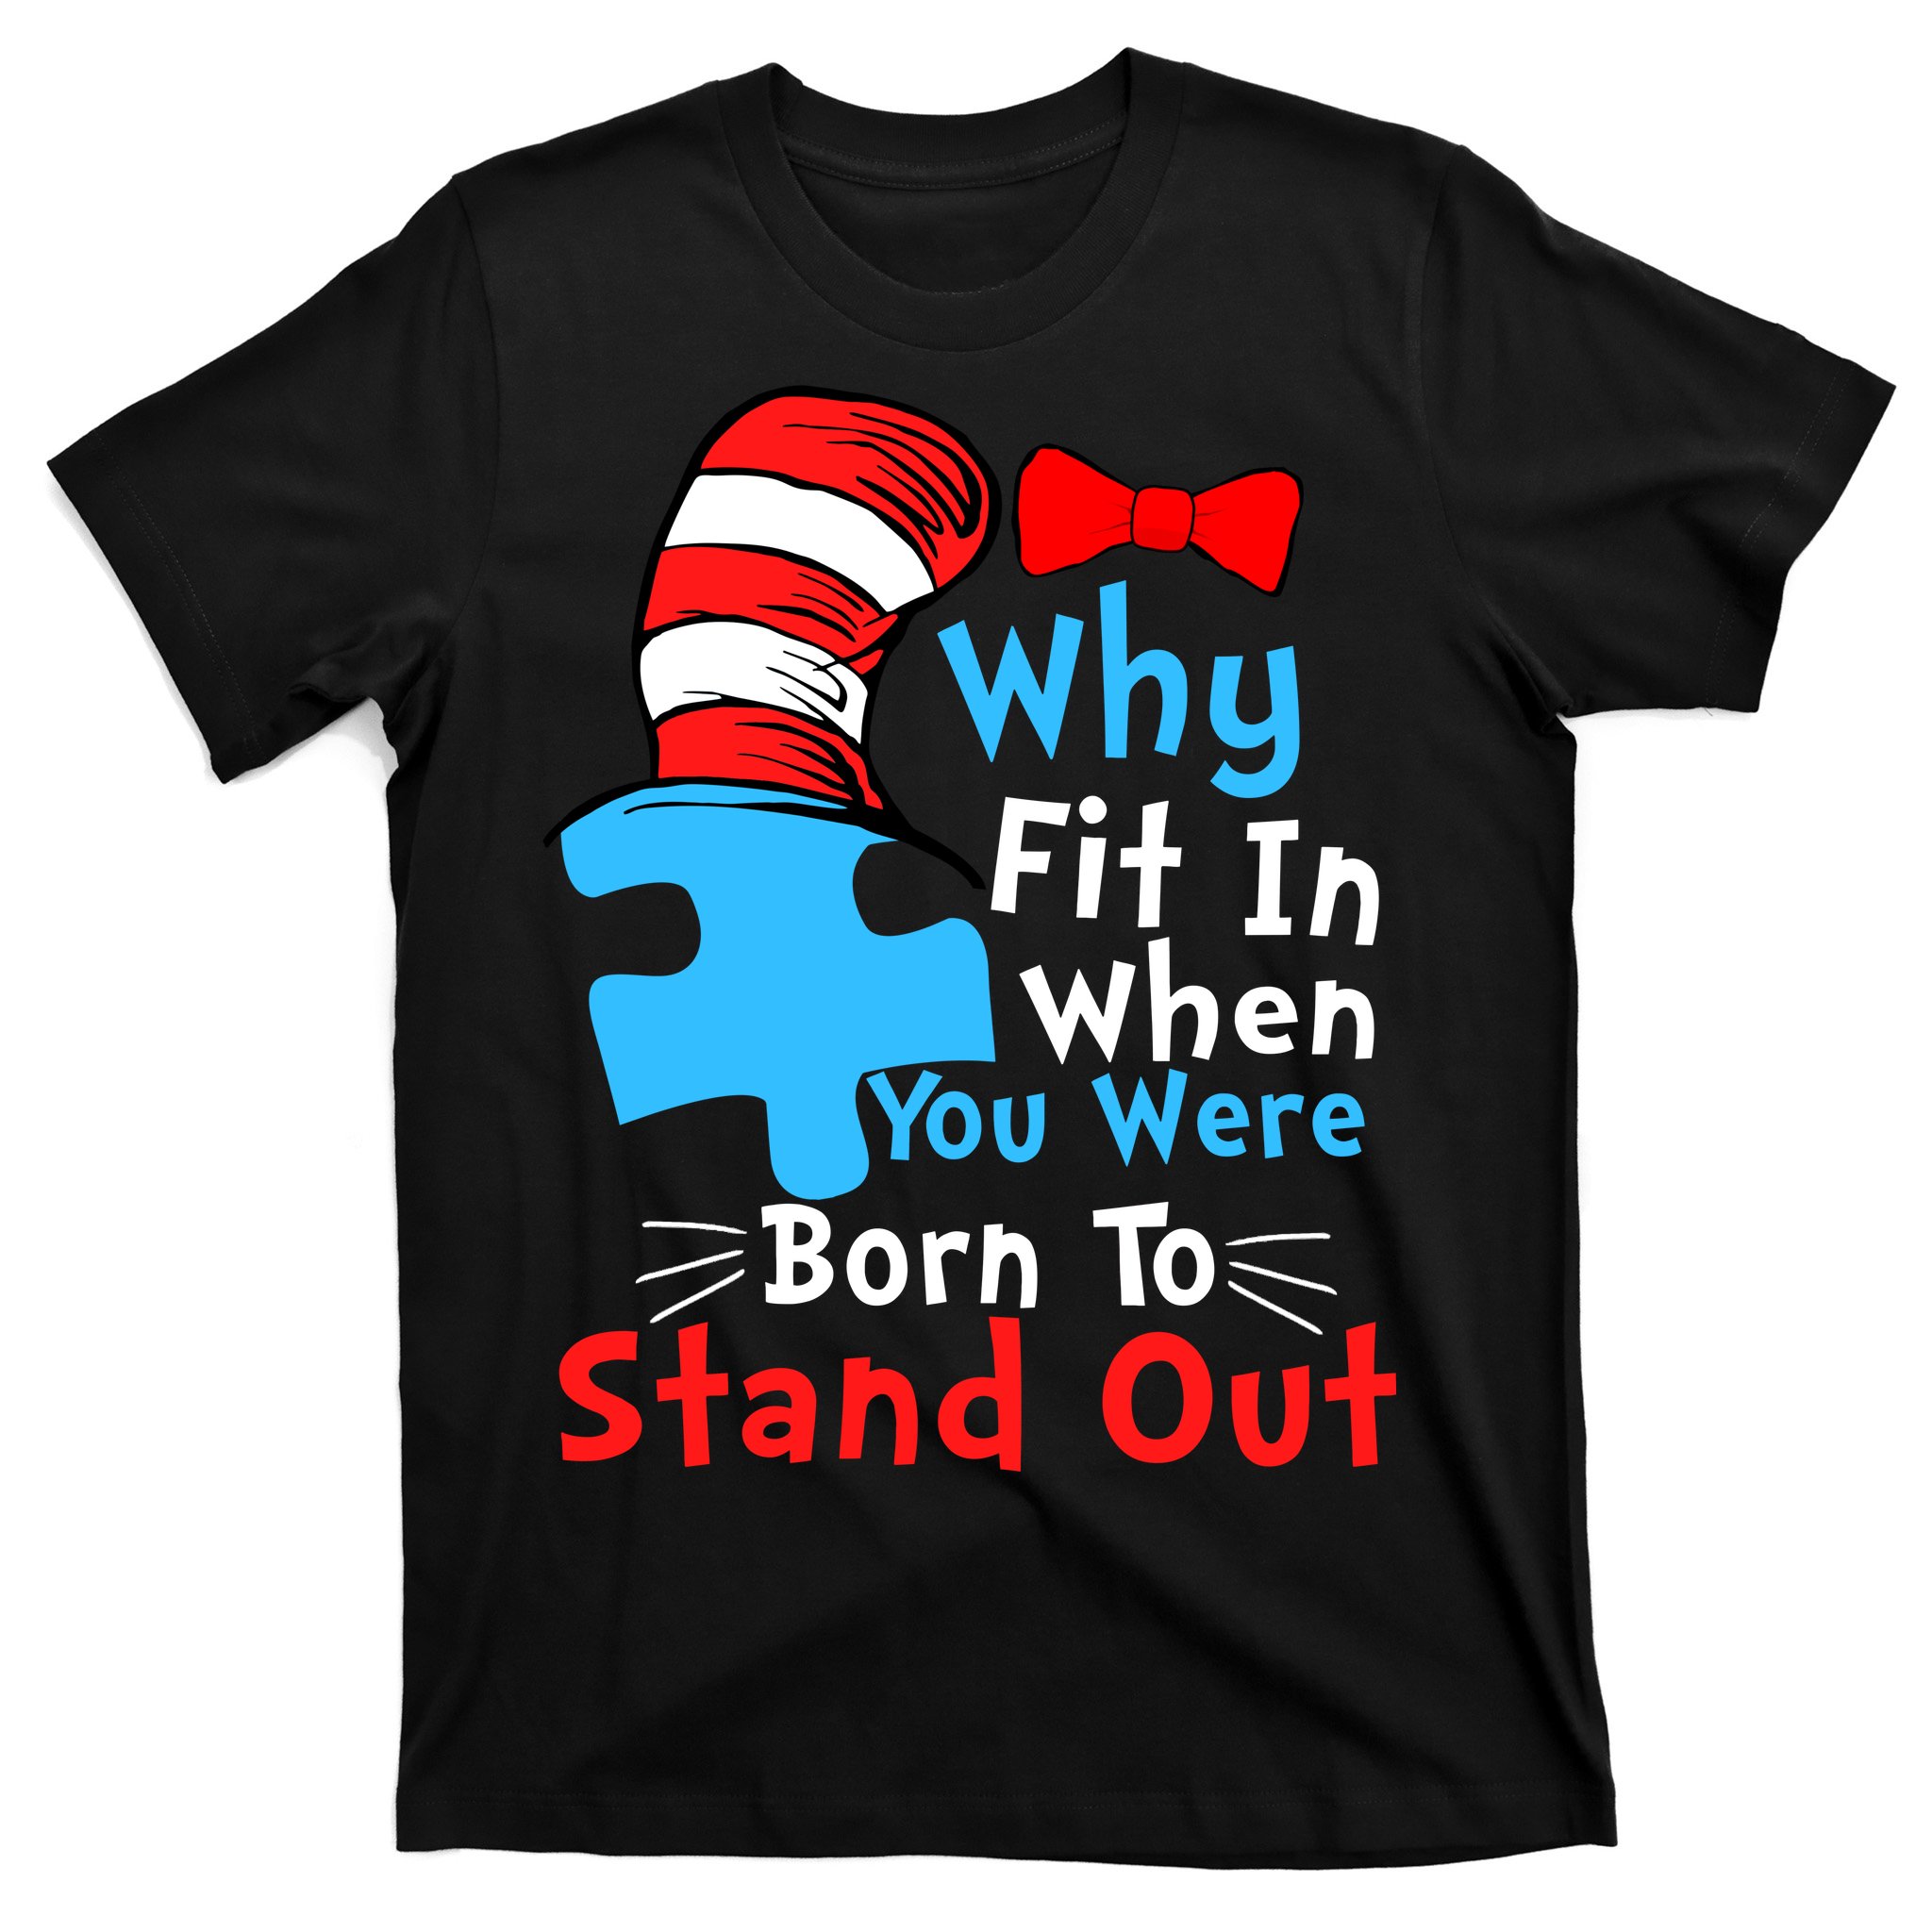 Why fit in when you were born to stand out!!!” – Blog days